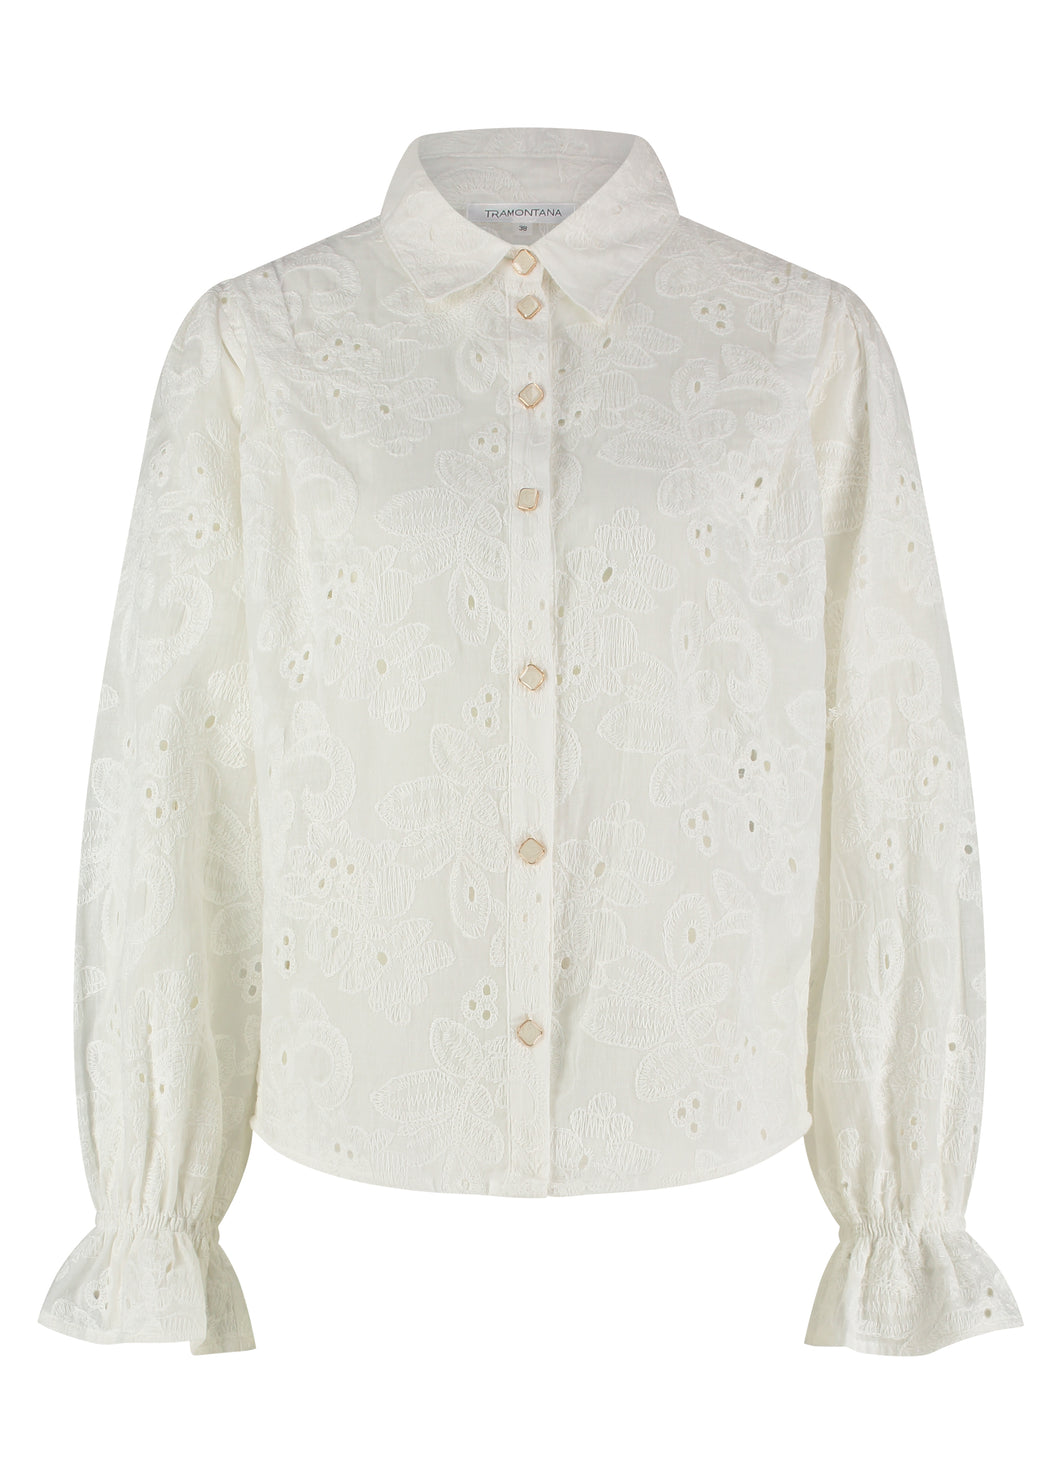 TRAMONTANA BLOUSE BRODERY off white